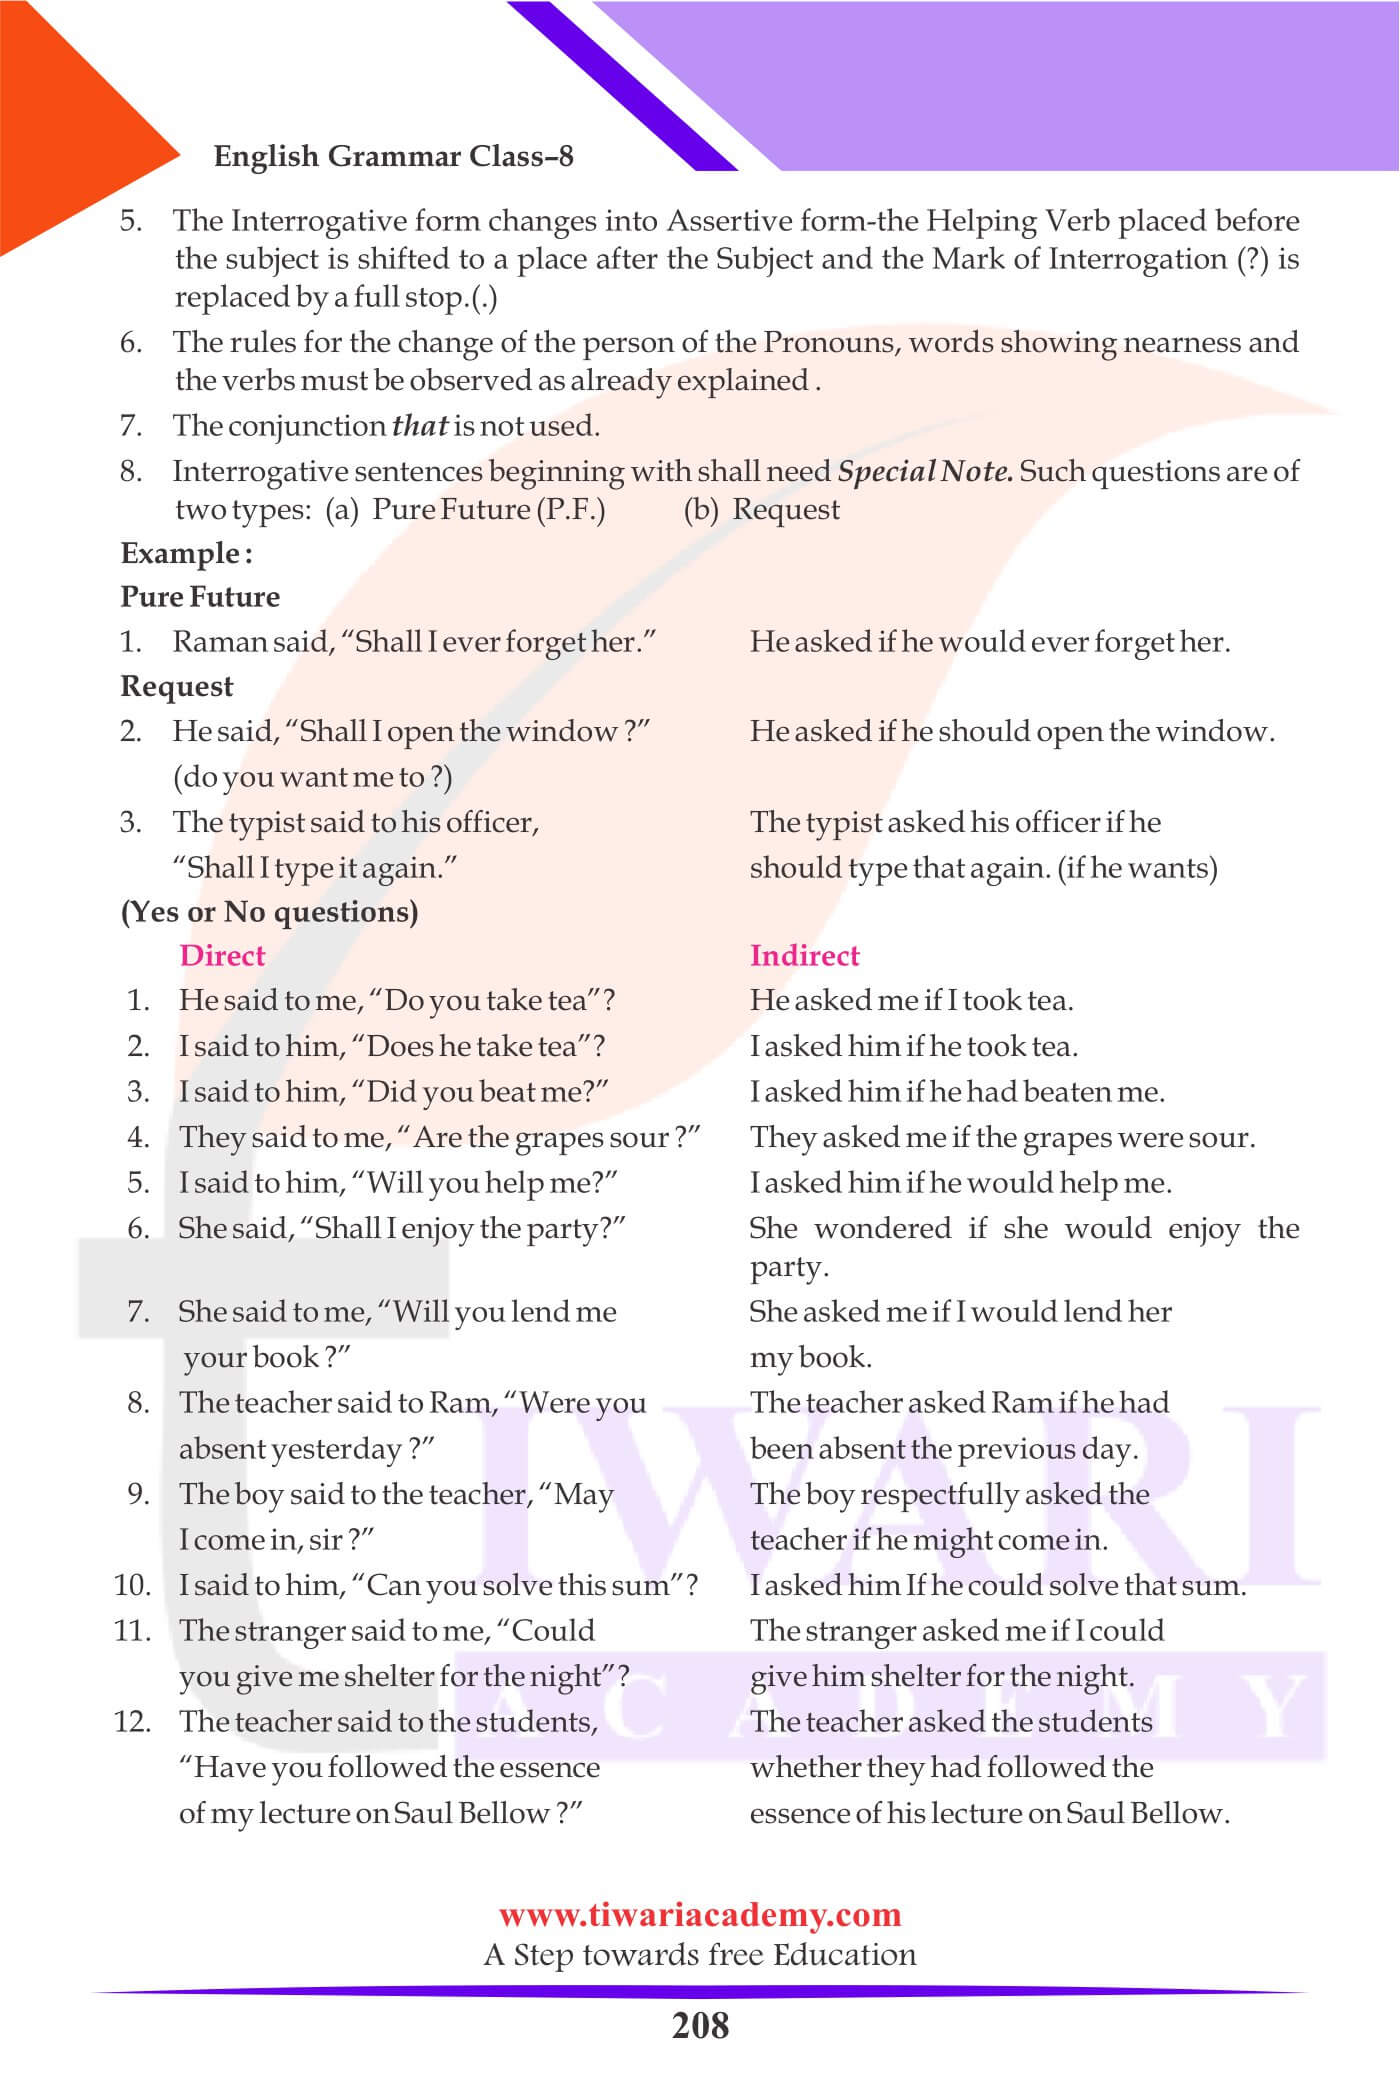 Class 8 English Grammar Direct and Indirect Exercises